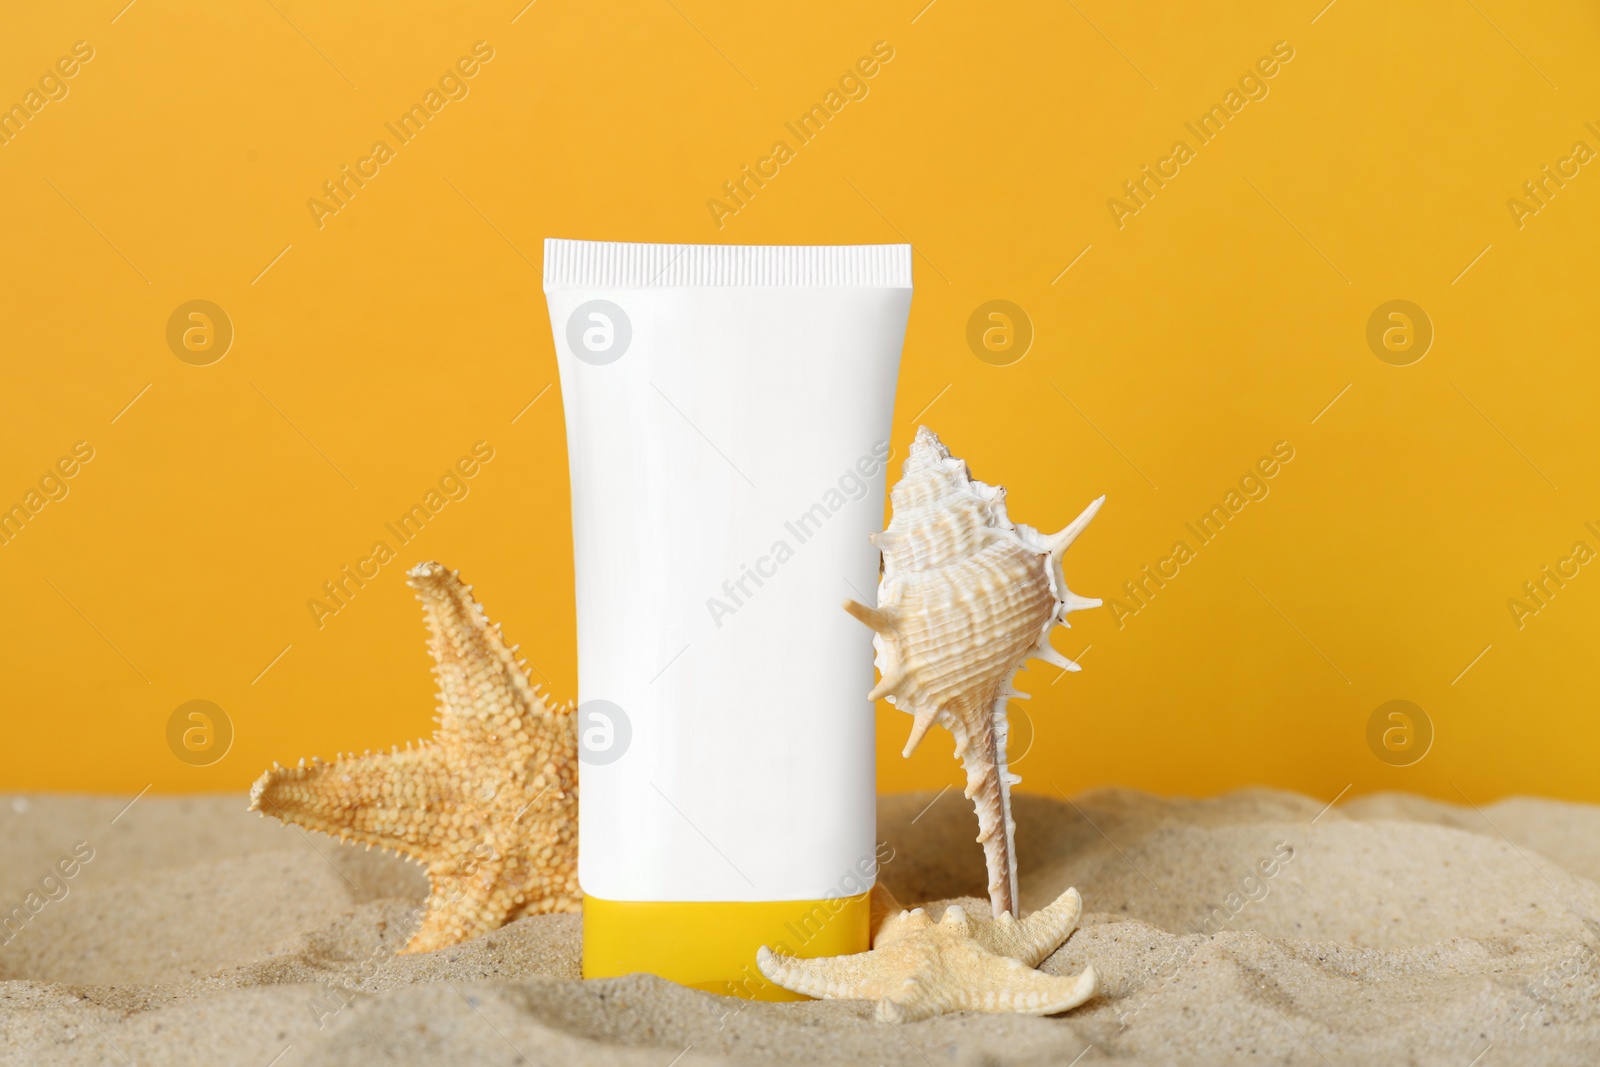 Photo of Suntan product, seashell and starfishes on sand against yellow background